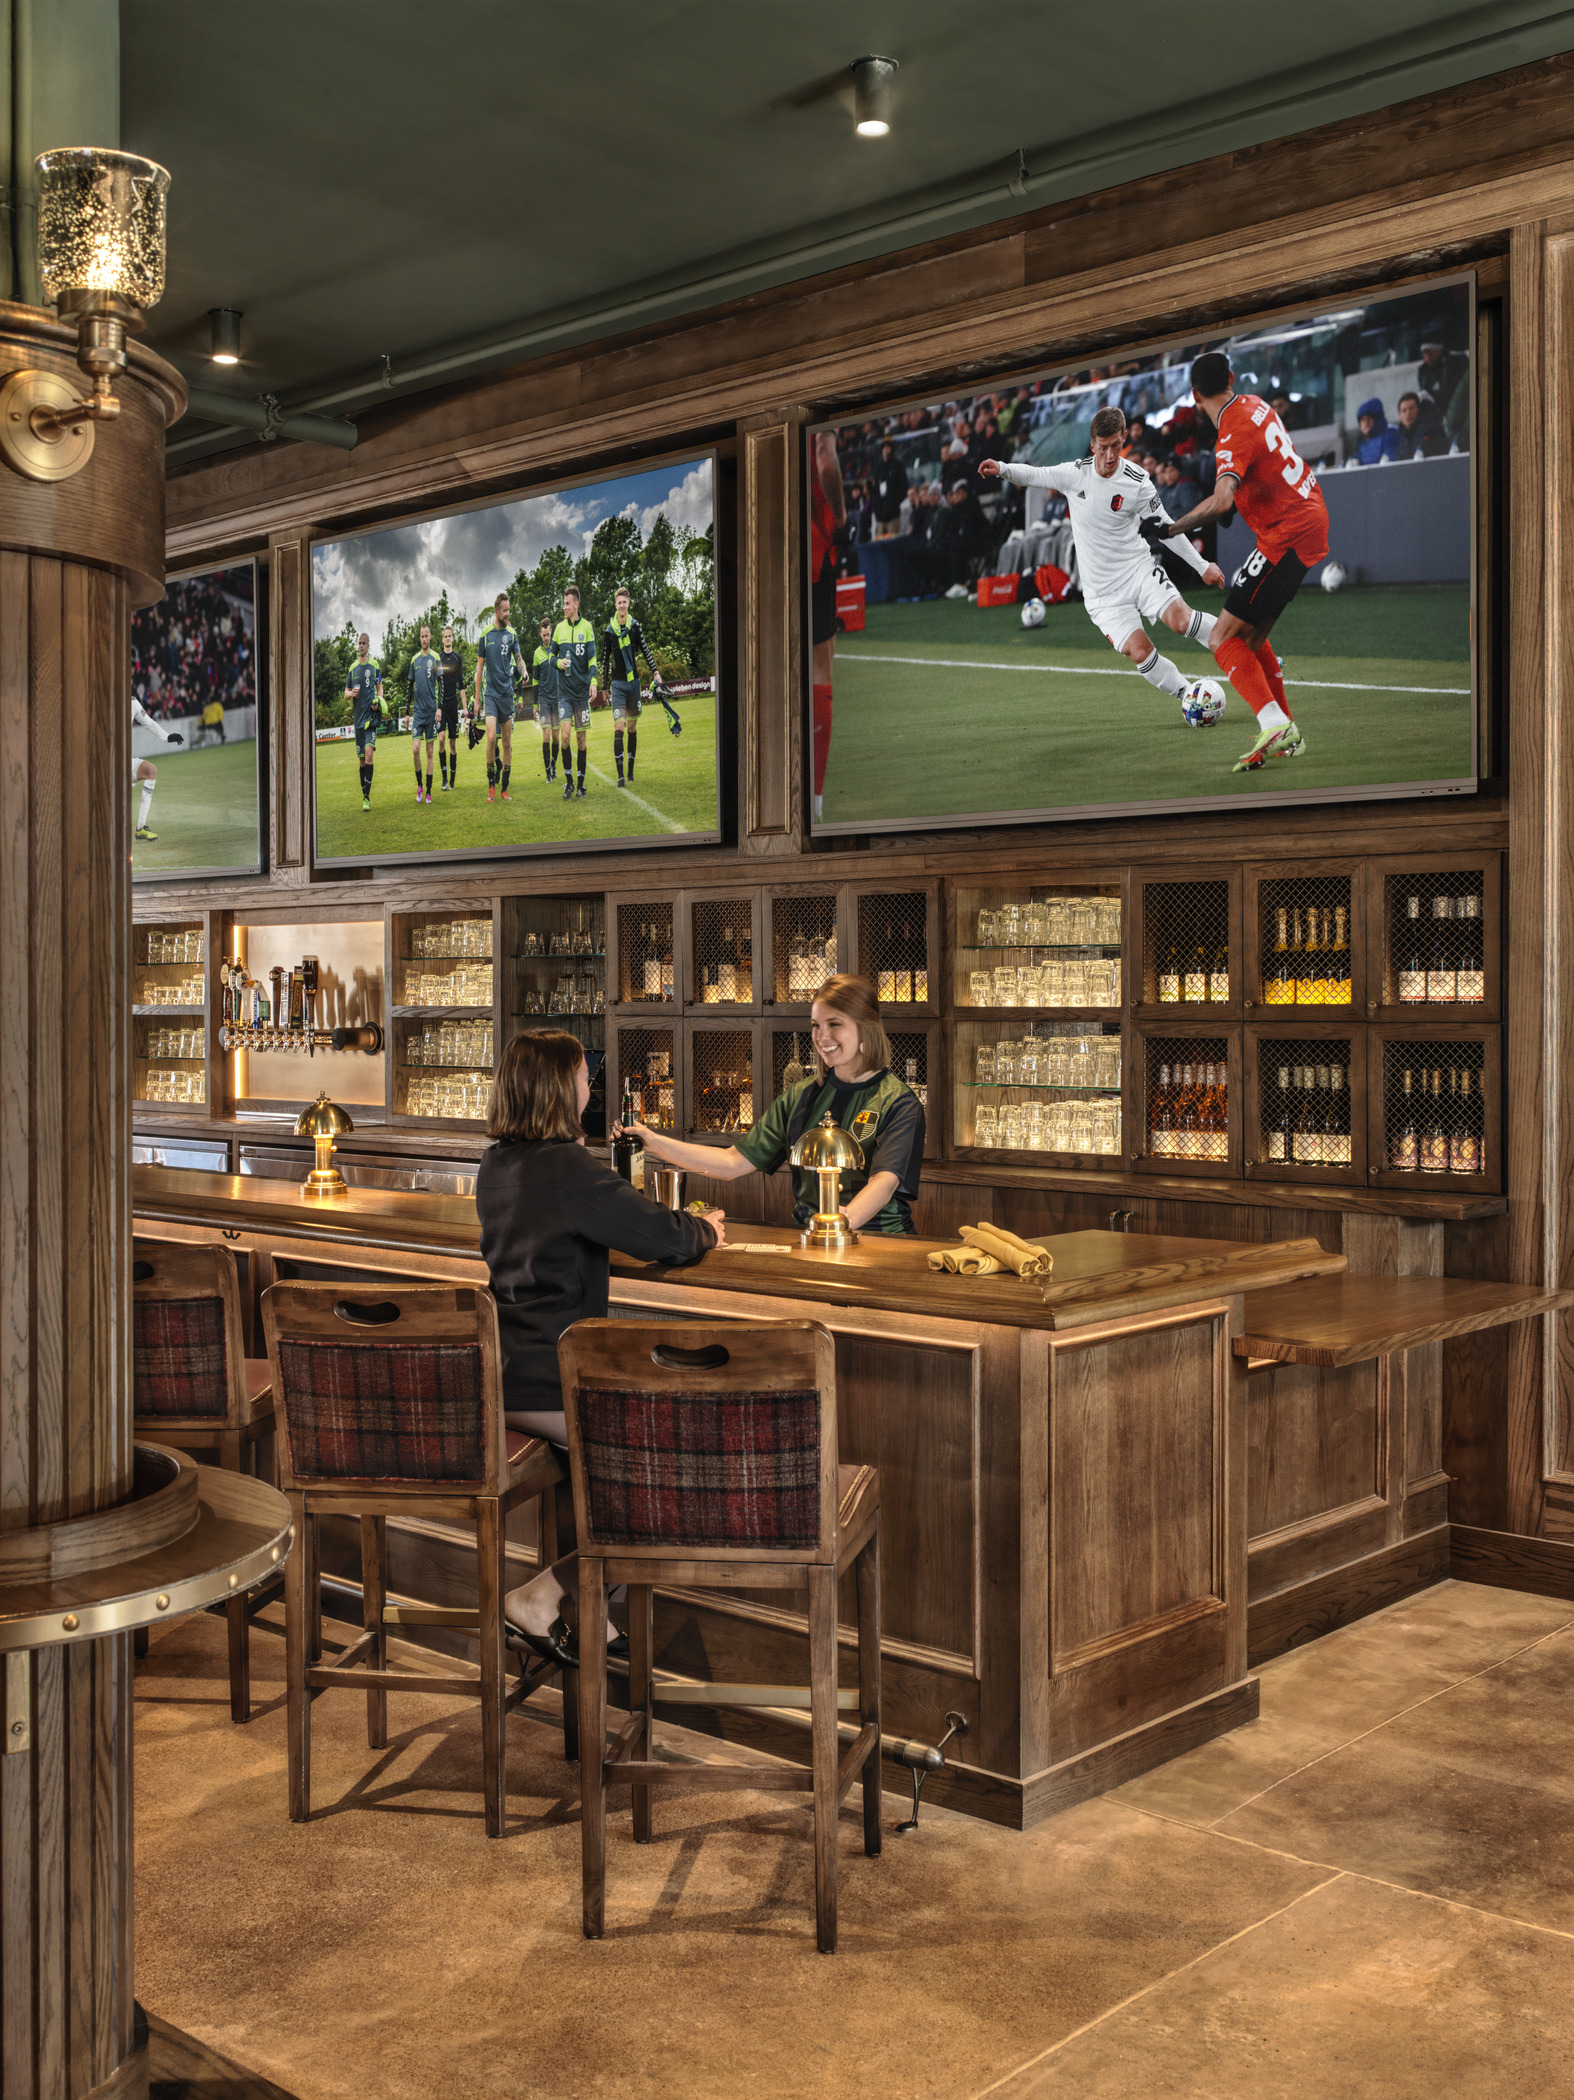 A woman in a soccer-themed outfit serves a beer to a customer inside an ornate wooden bar, as soccer matches play on TVs above the bar